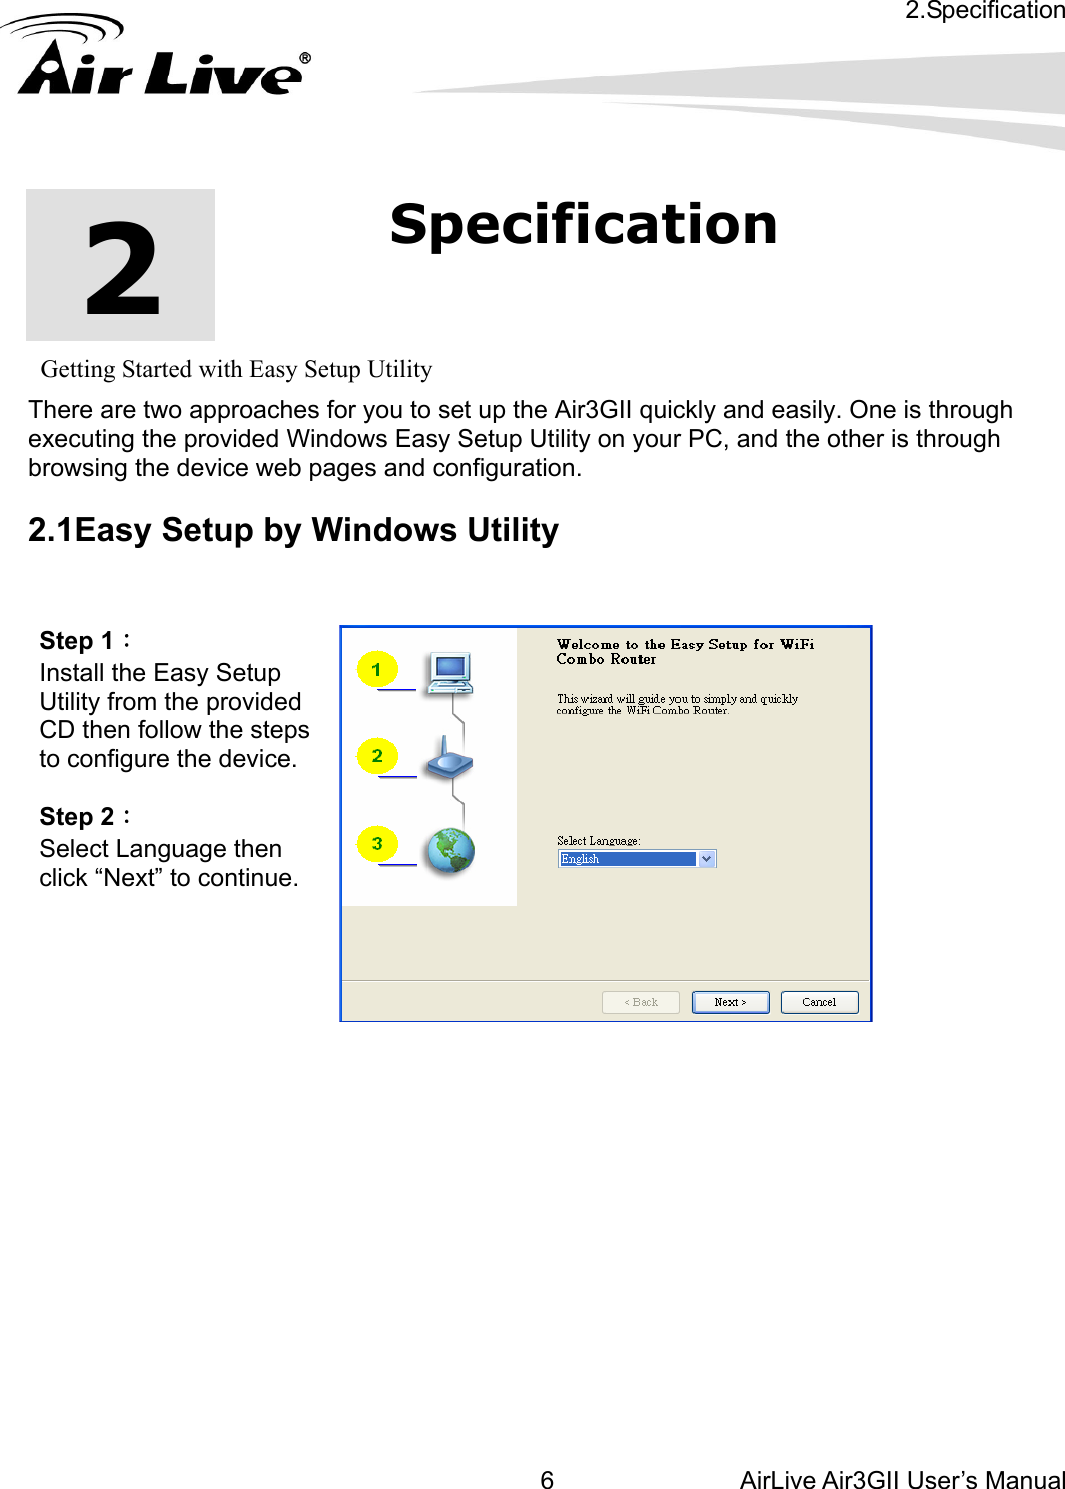 2.Specification AirLive Air3GII User’s Manual 6      2  2.Specification         Getting Started with Easy Setup Utility There are two approaches for you to set up the Air3GII quickly and easily. One is through executing the provided Windows Easy Setup Utility on your PC, and the other is through browsing the device web pages and configuration.  2.1Easy Setup by Windows Utility   Step 1：  Install the Easy Setup Utility from the provided CD then follow the steps to configure the device.  Step 2：  Select Language then click “Next” to continue.                